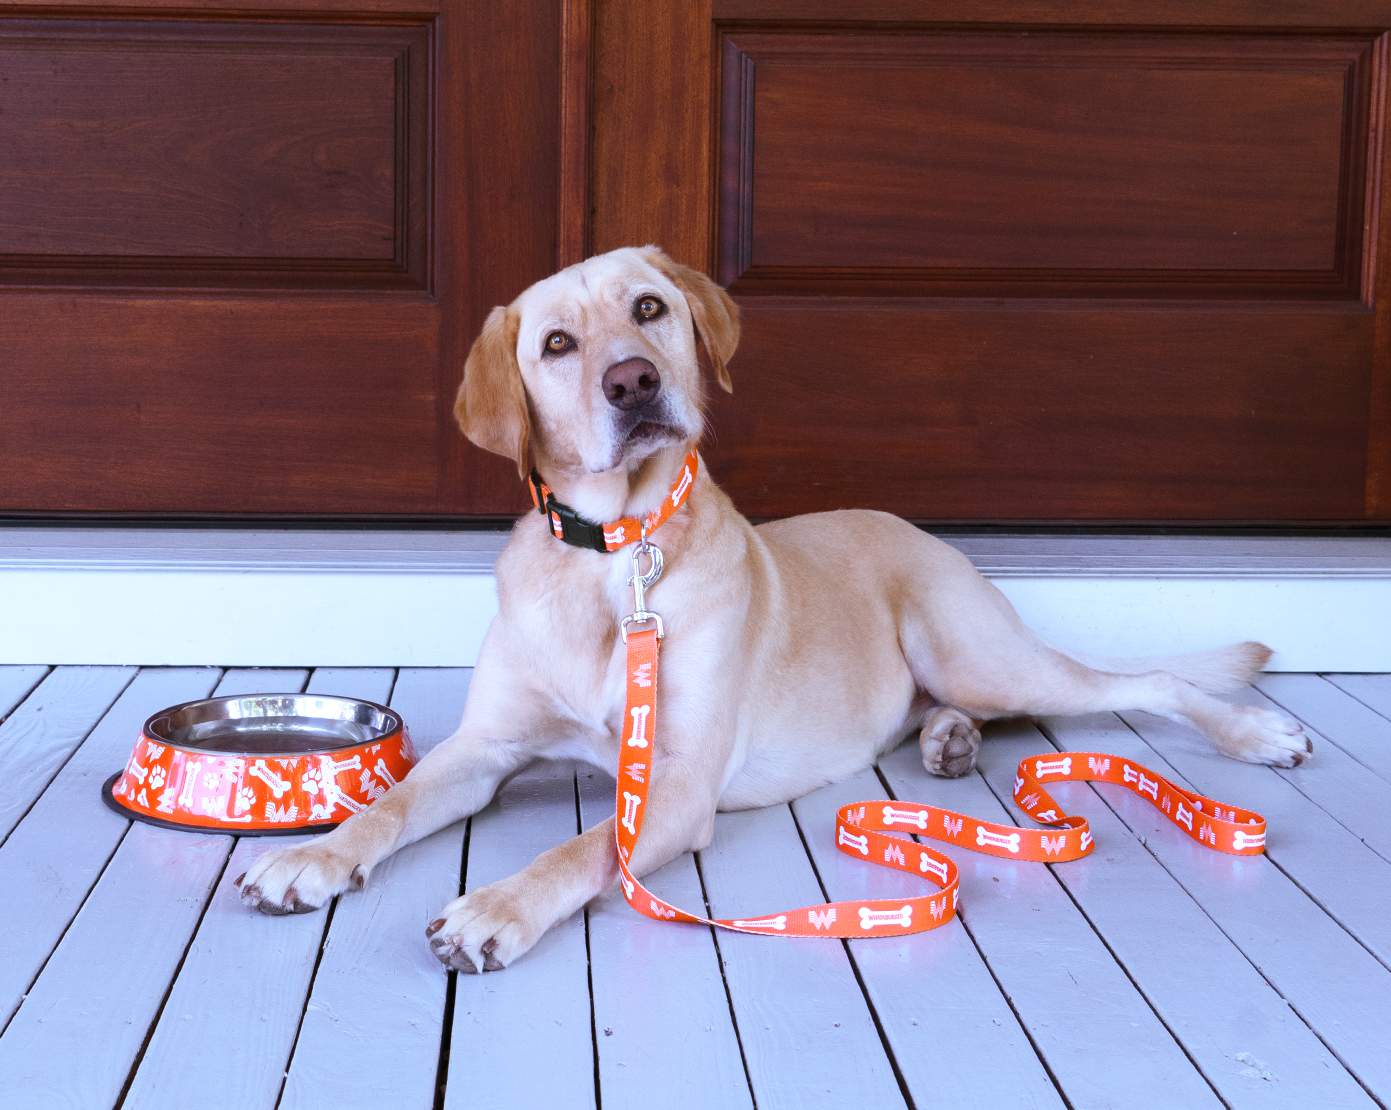 Whataburger has launched a pawsome new pet set thats perfect for your furry friends